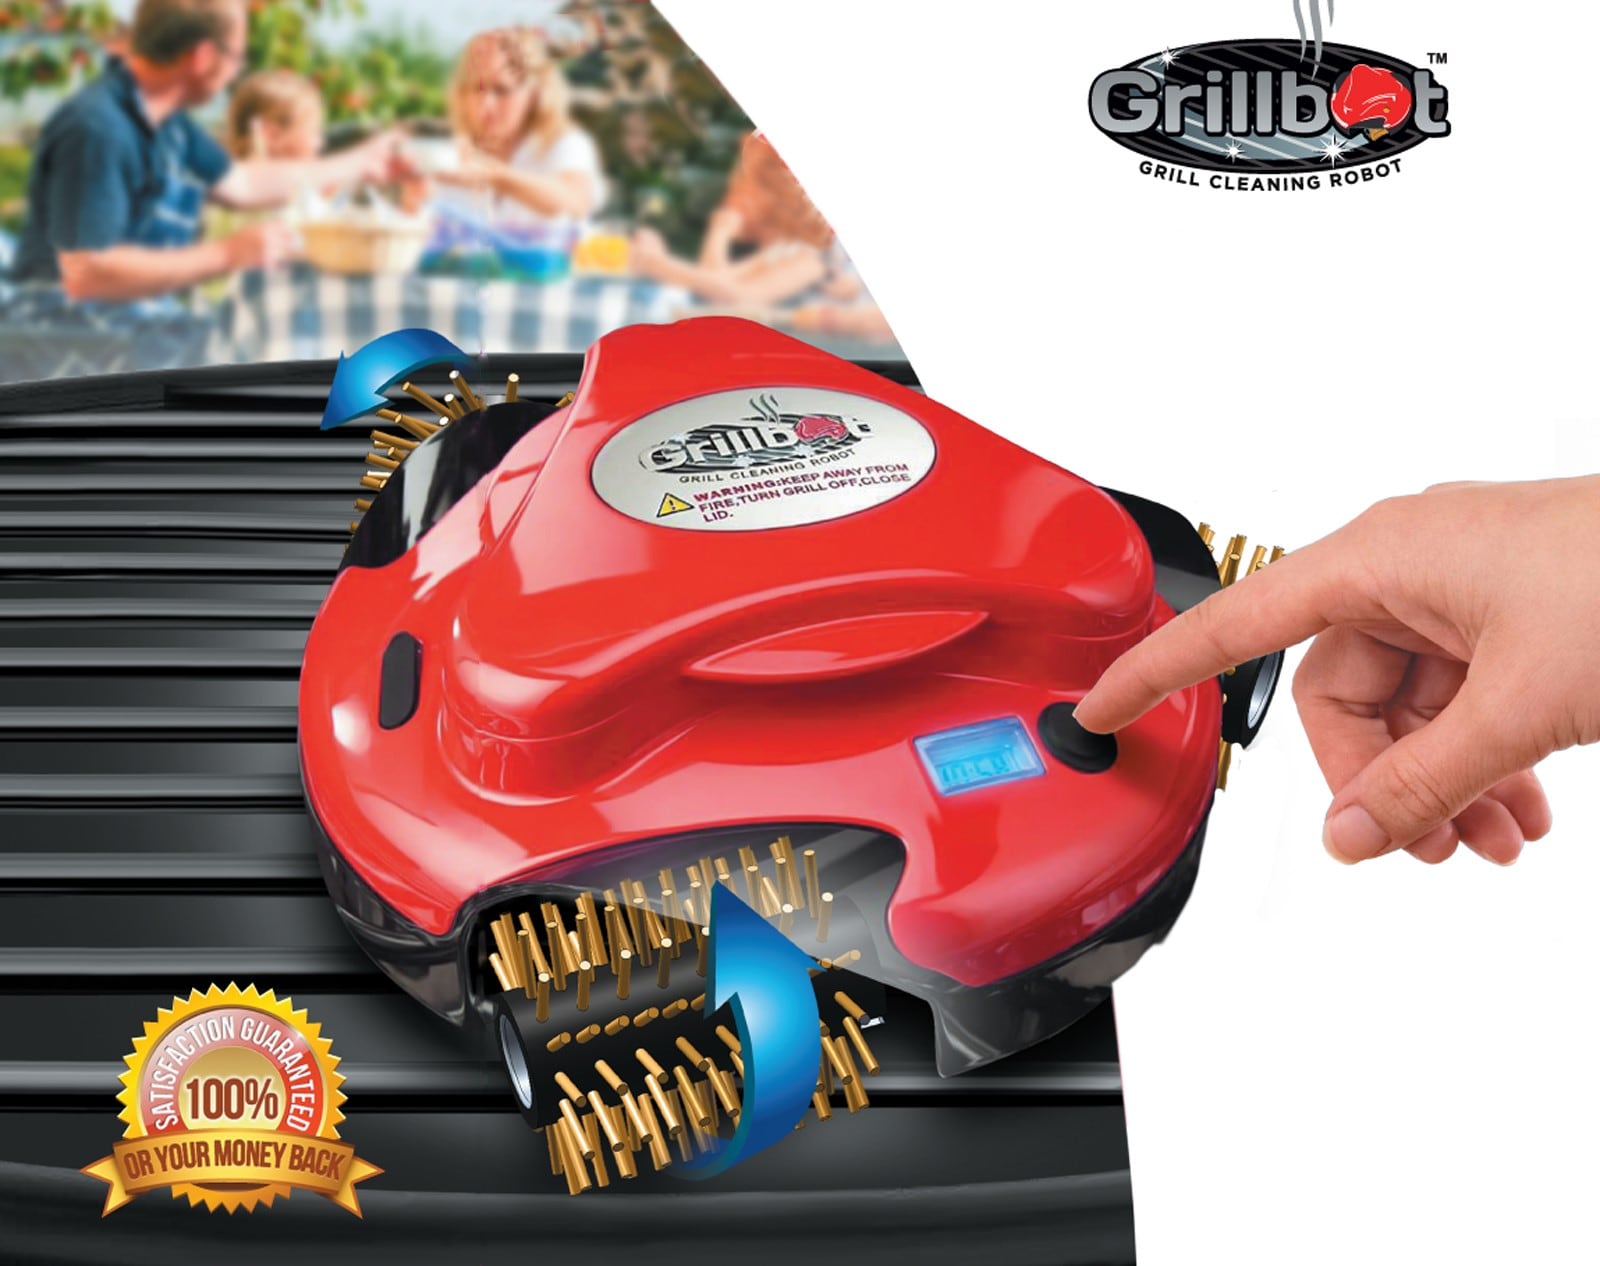 Grillbot Review, Automated Robot Grill Cleaner